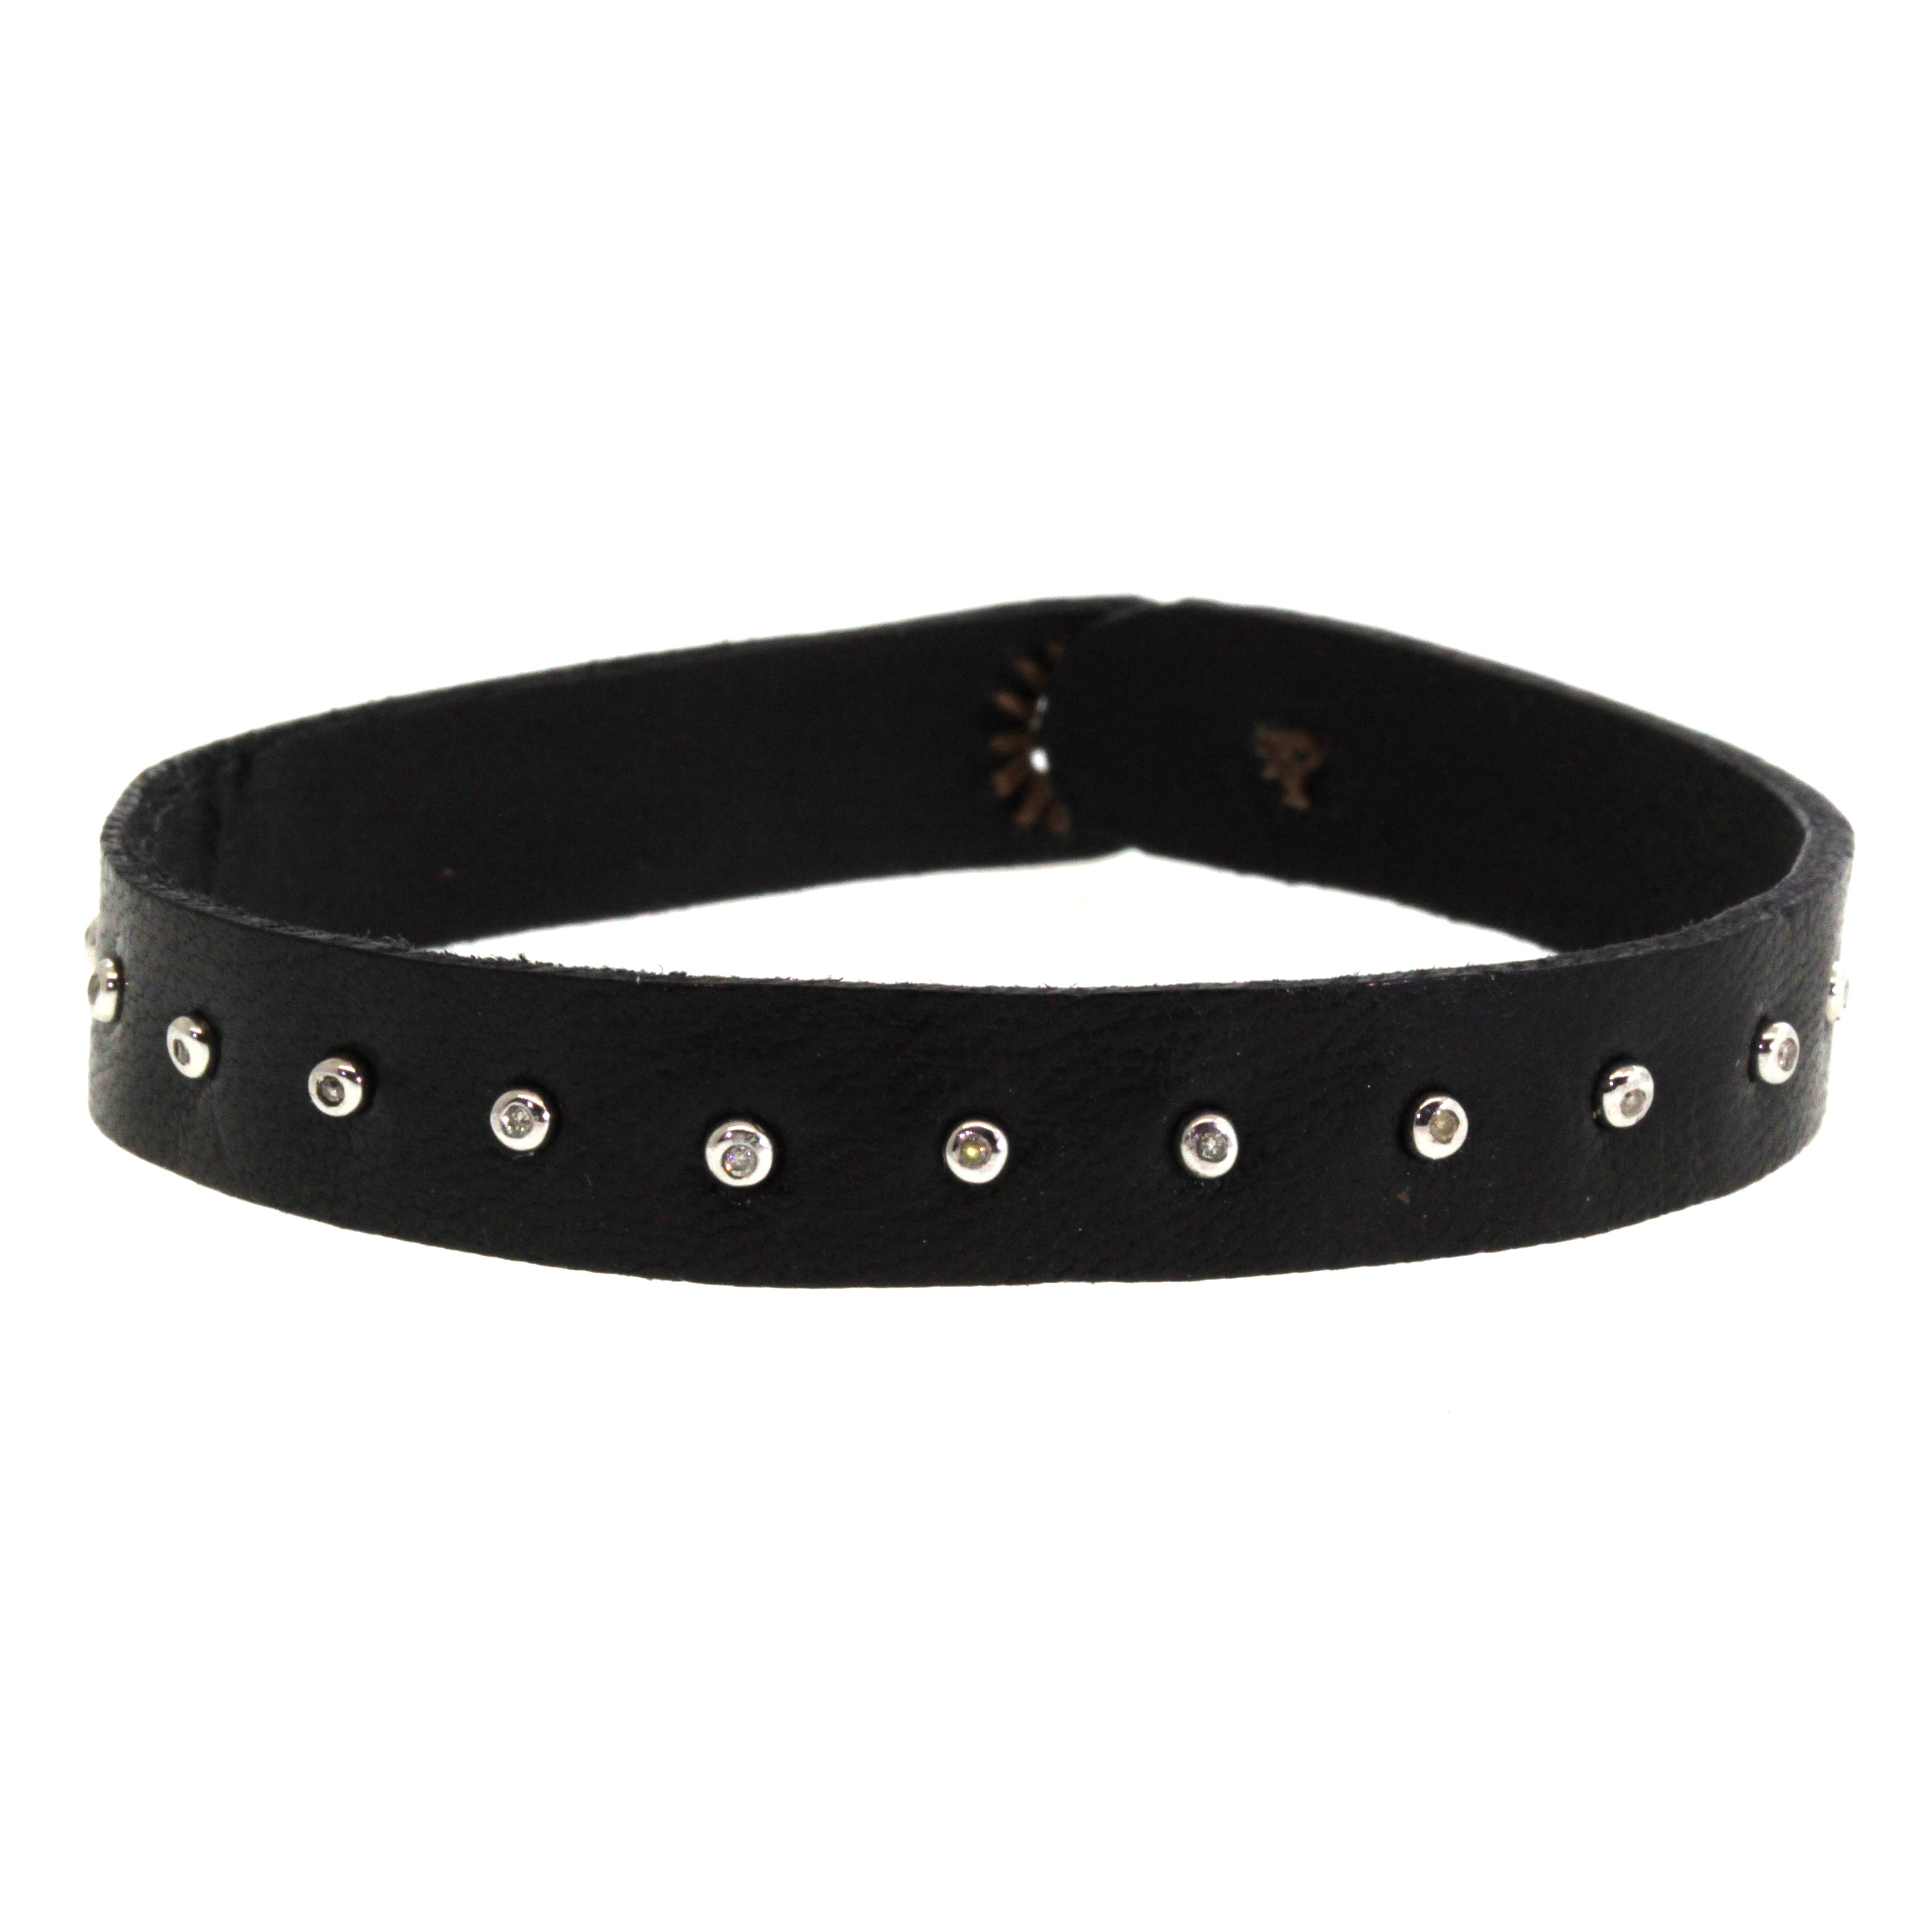 This Diamond Studded Leather Bracelet features 15 shimmering diamonds studded into hand cut and dyed black leather. It was expertly crafted at Rebecca Lankford Designs in Houston, Texas.